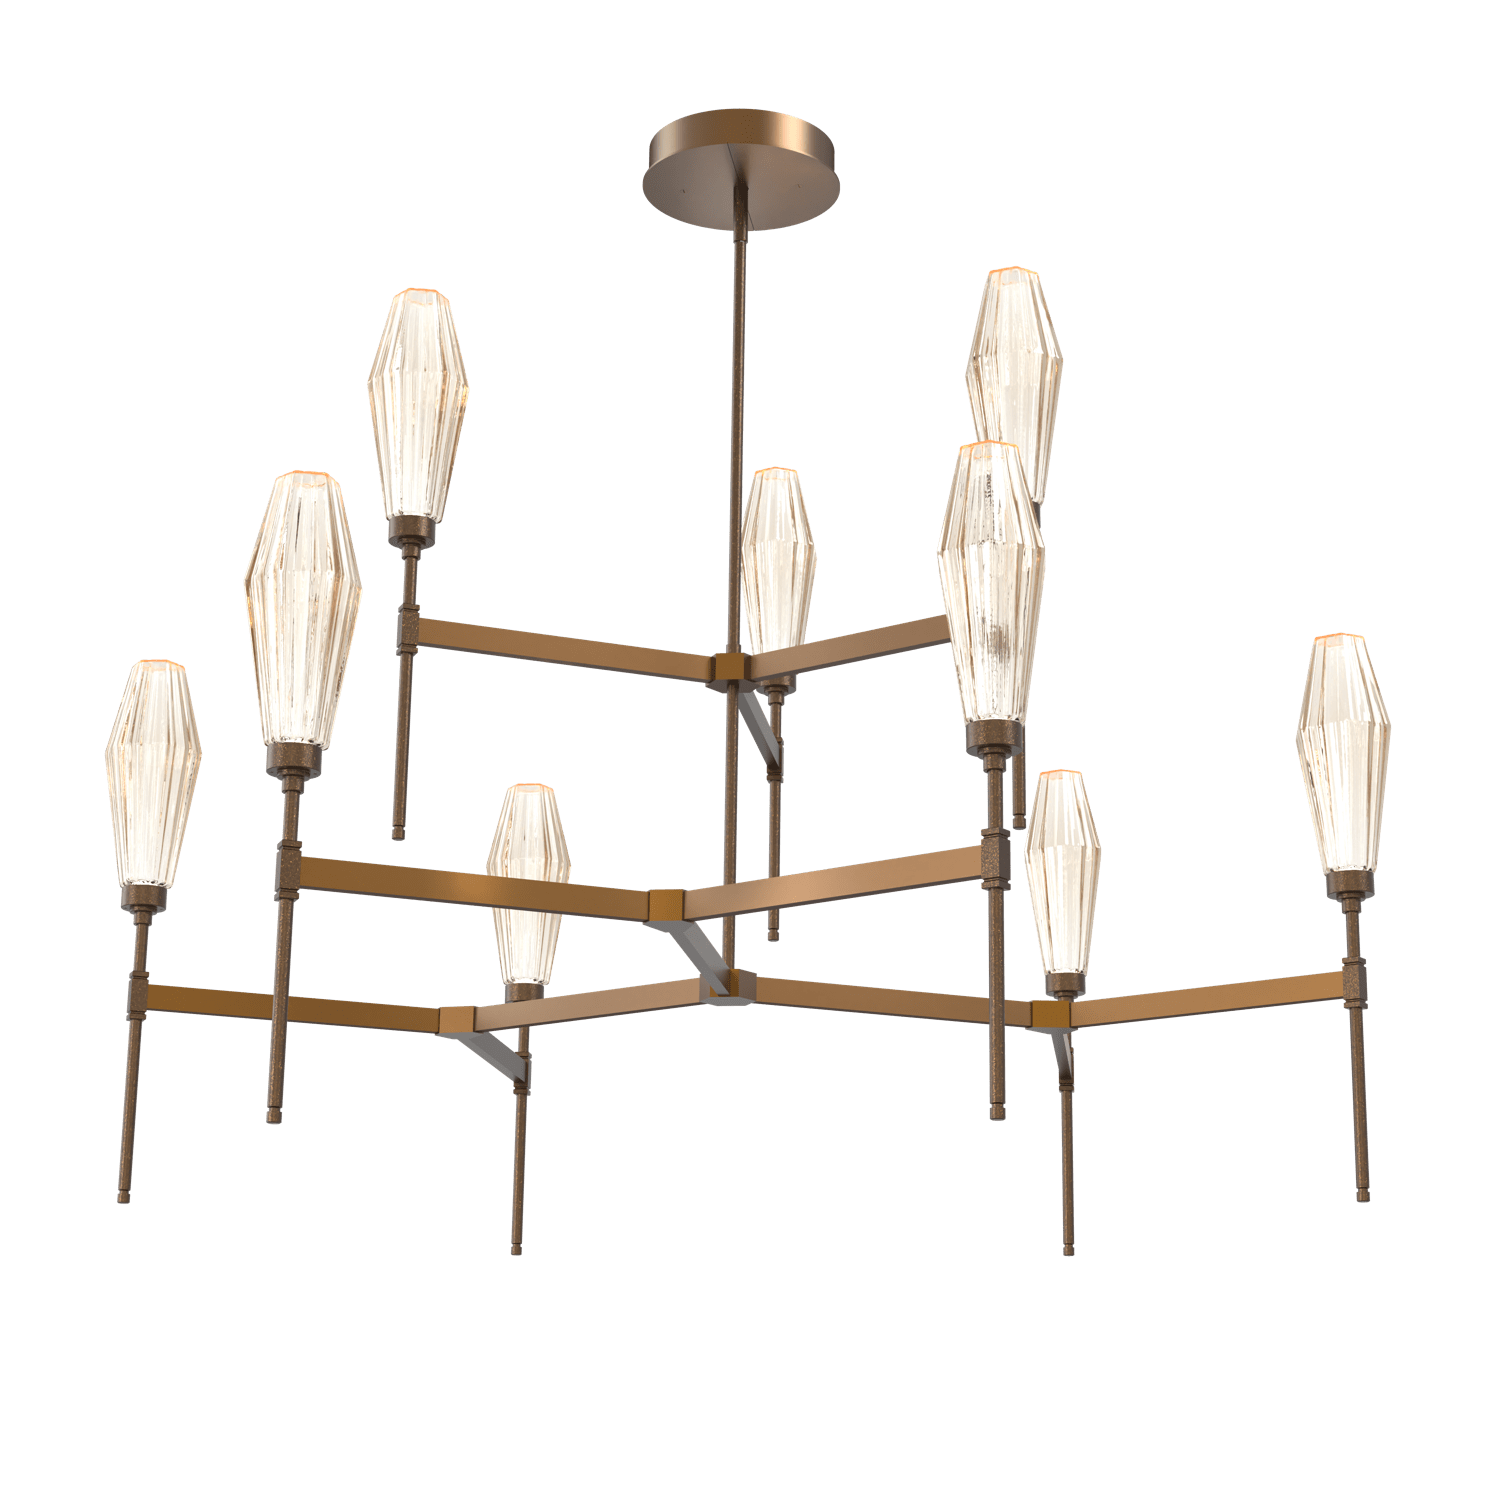 CHB0049-54-FB-RA-Hammerton-Studio-Aalto-54-inch-round-two-tier-belvedere-chandelier-with-flat-bronze-finish-and-optic-ribbed-amber-glass-shades-and-LED-lamping